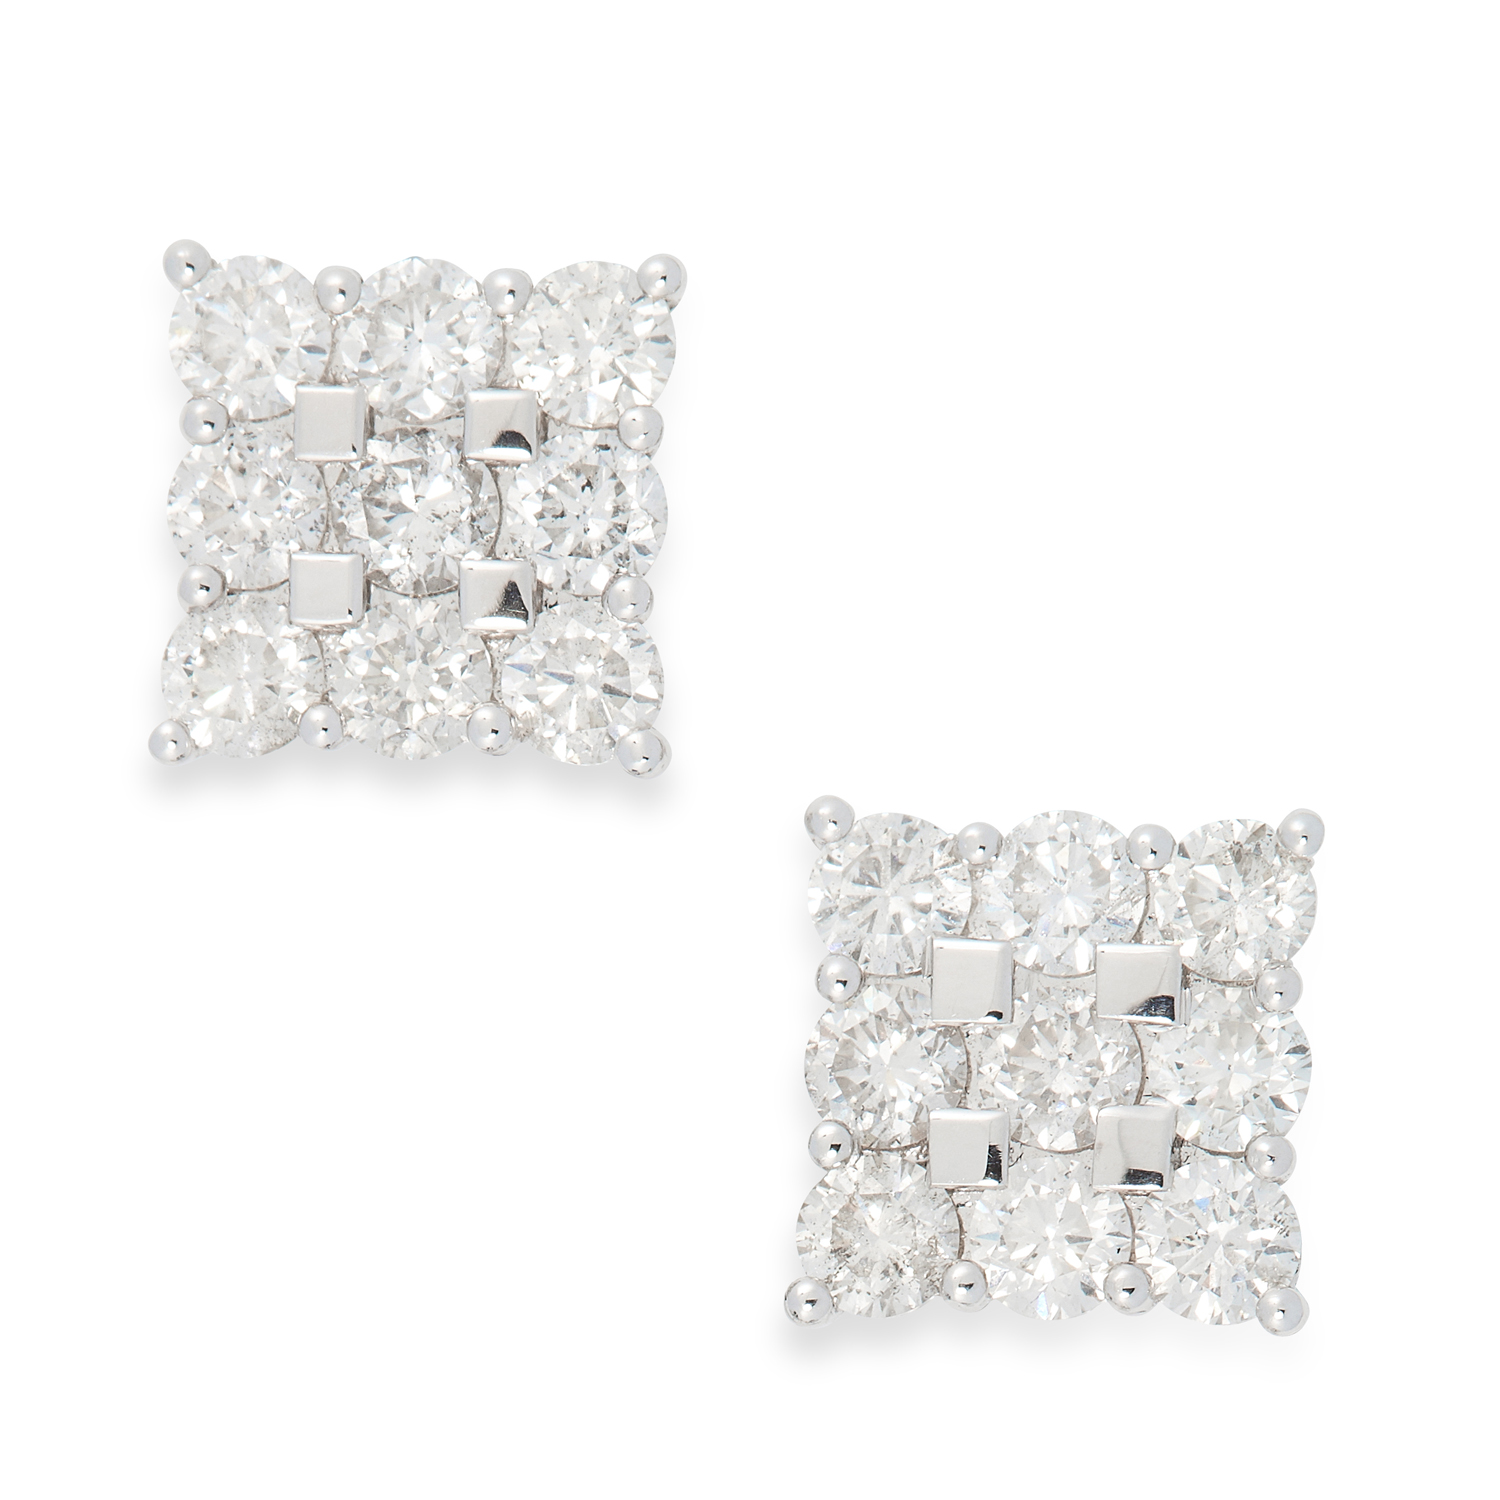 A PAIR OF DIAMOND CHECKERBOARD EARRINGS in 18ct white gold, in checkerboard design set with 2.73